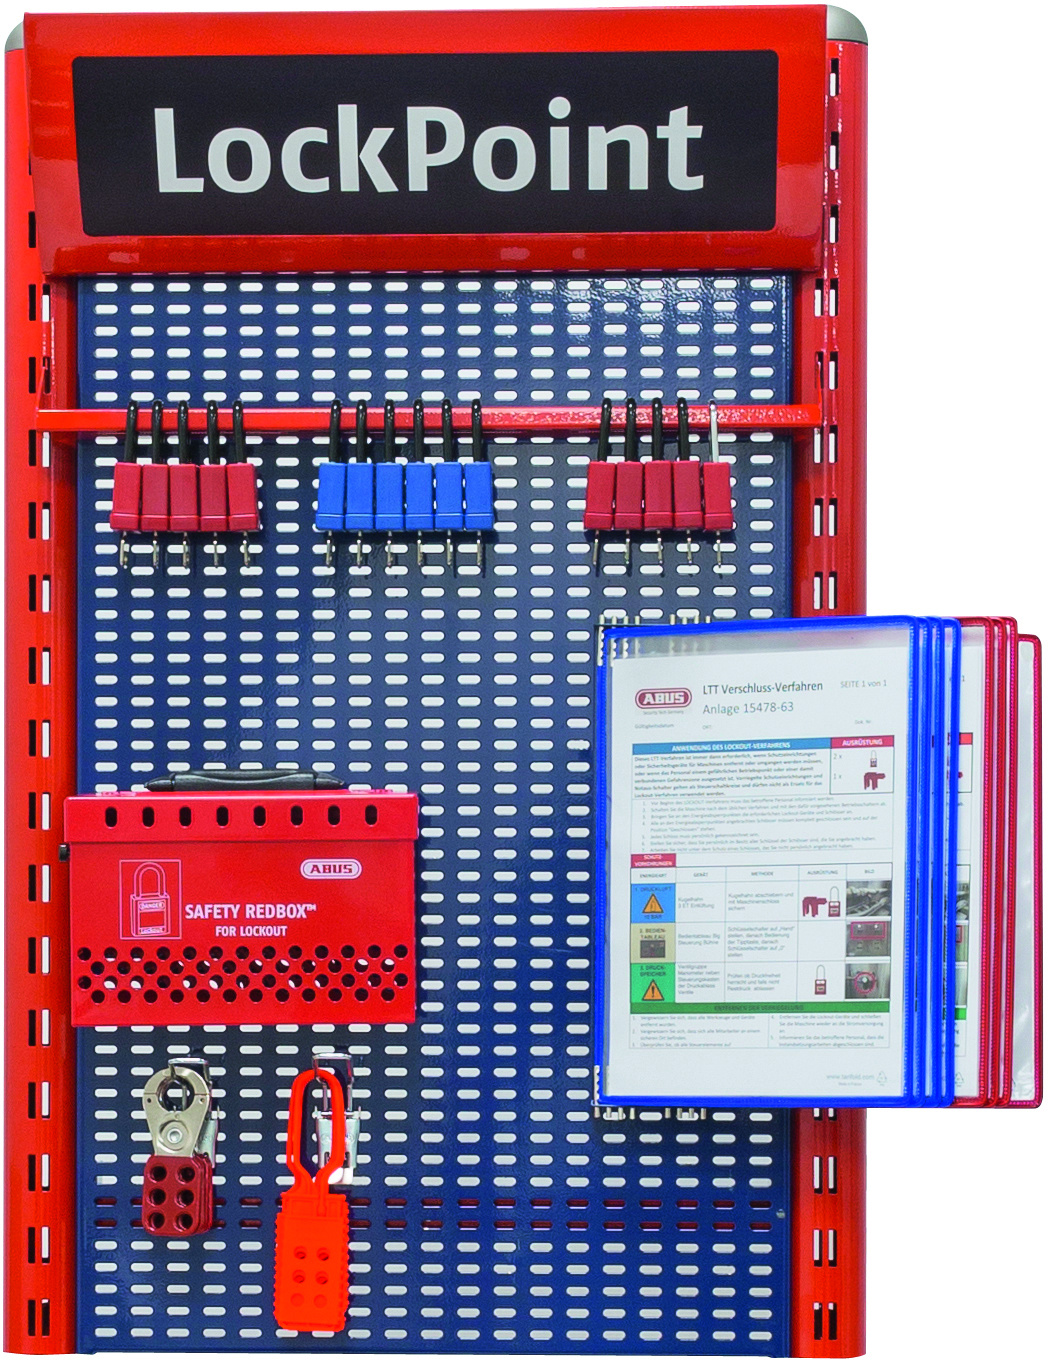 LockPoint your LOTO solution